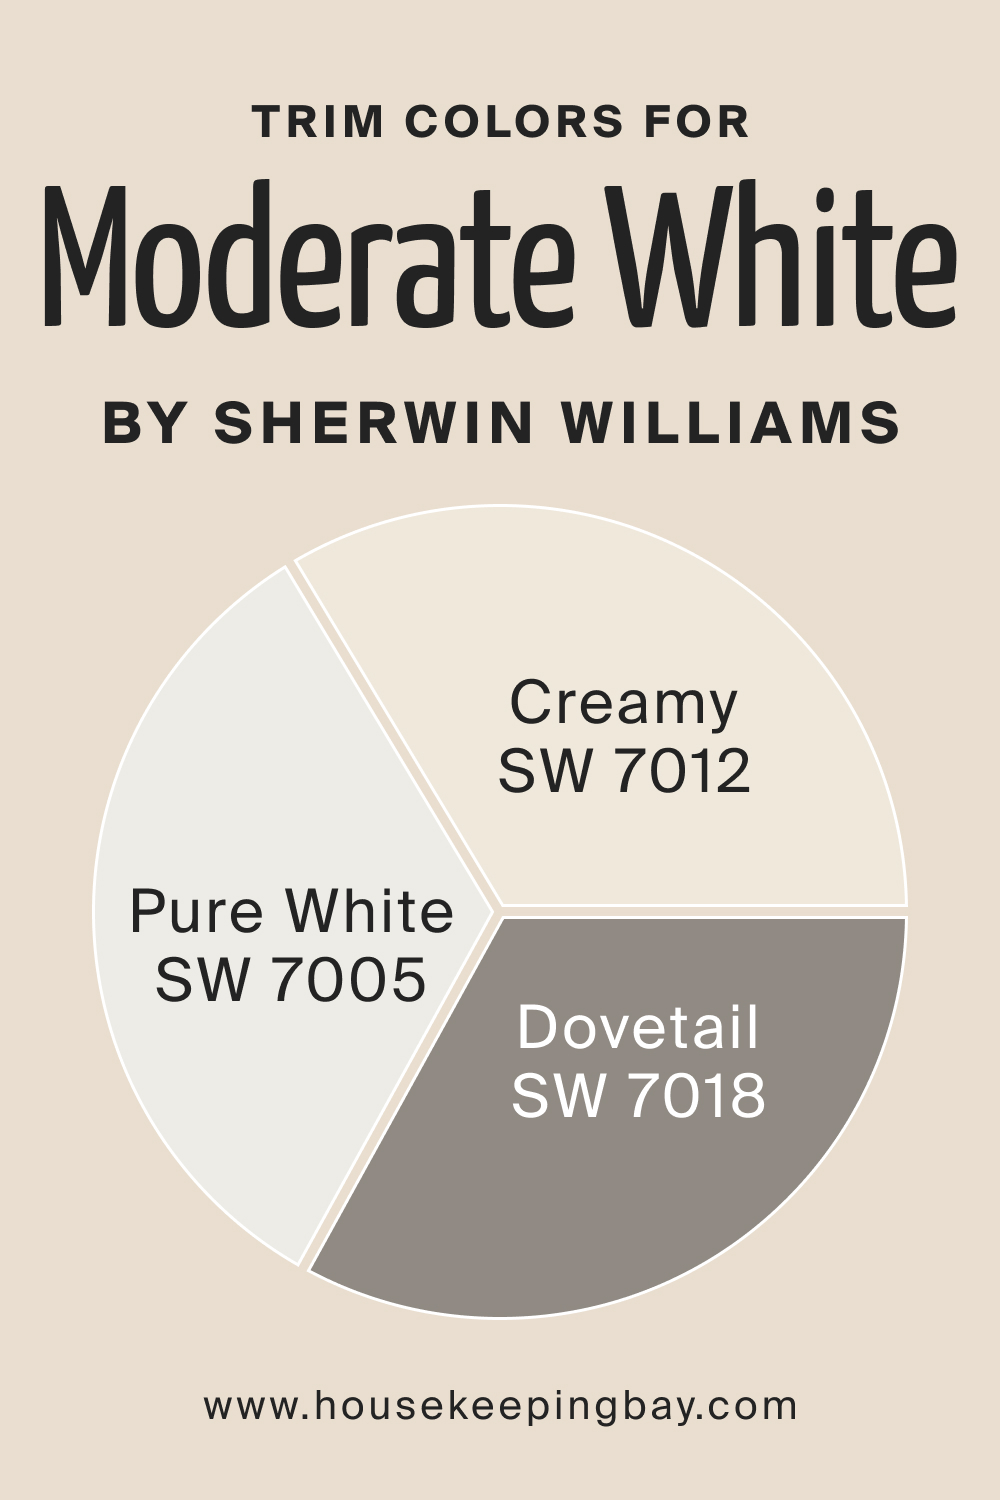 Trim Color for SW Moderate White by Sherwin Williams, www. Housekeepingbay.com